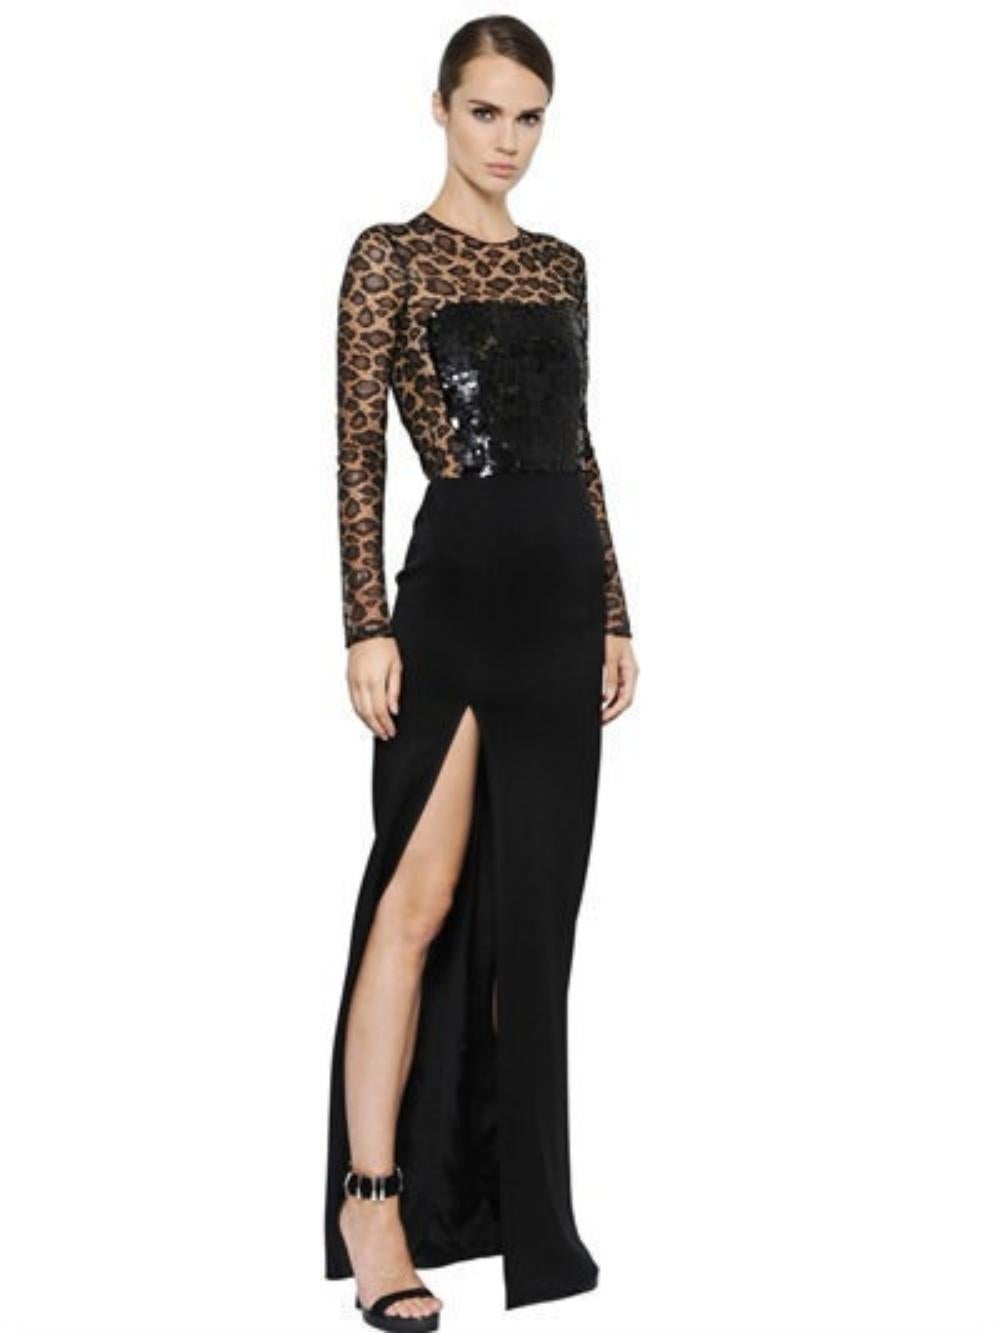  Alexander McQueen Sequin Embellished Lace Mesh Transparent Gown Maxi Dress For Sale 14